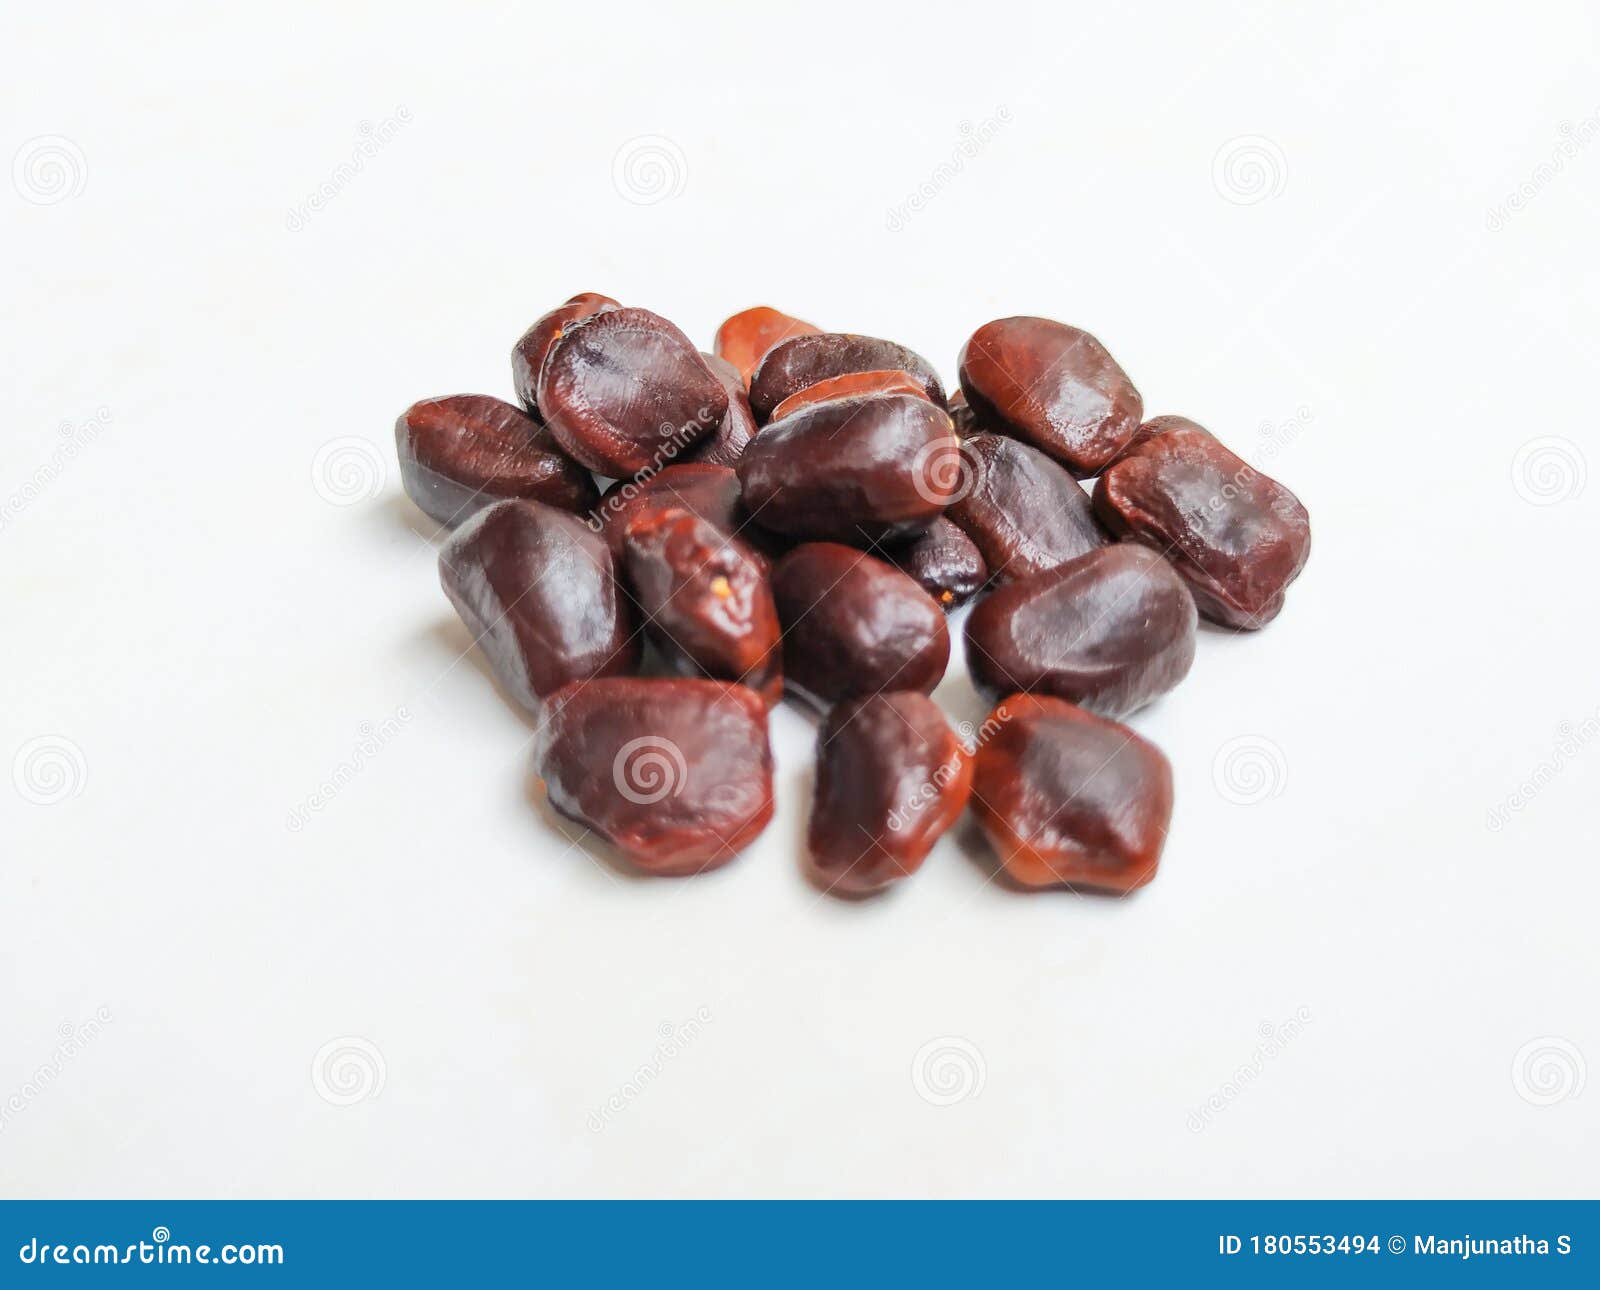 Tamarind Fruit Seeds Pile And Texture On White Background Stock Photo Image Of Asian Nutrition